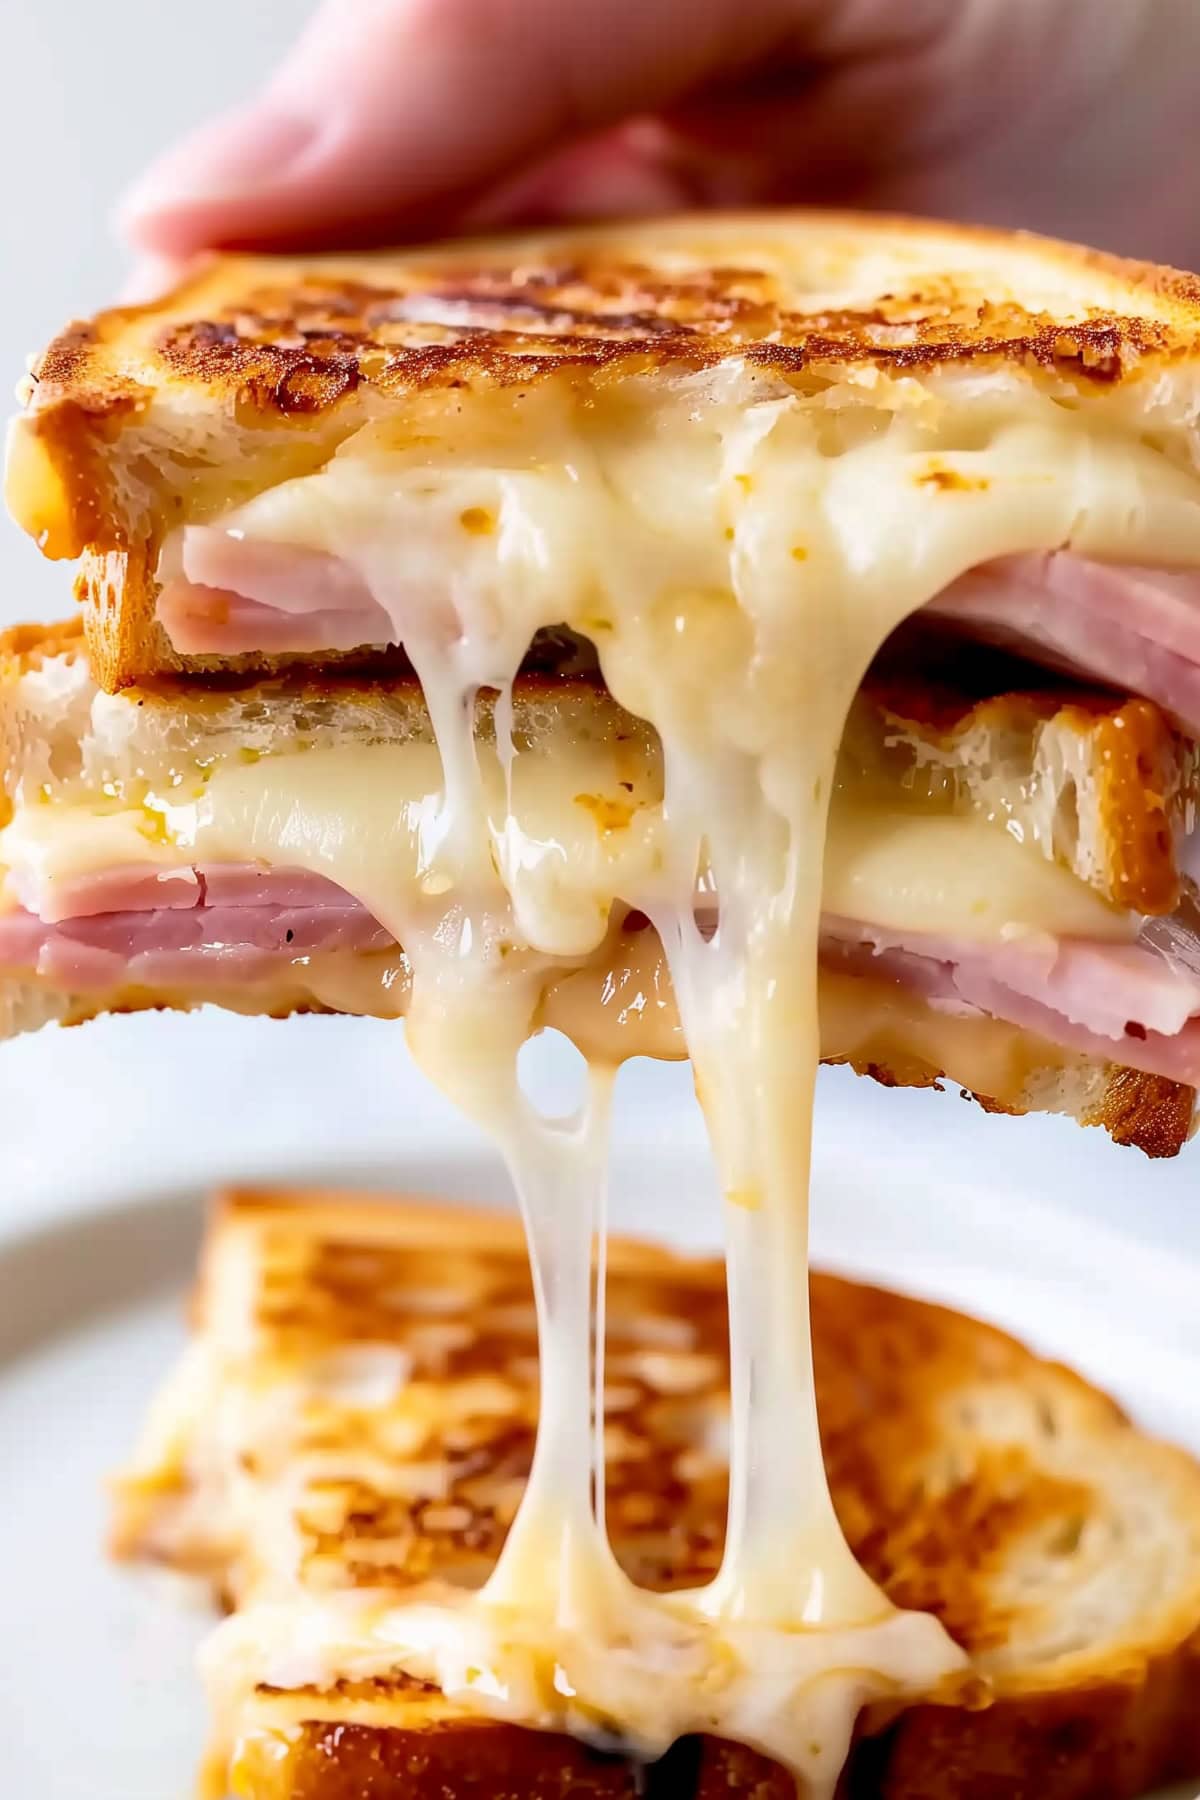 A grilled ham and cheese sandwich held in hand, with melted cheese stretching out from the bite.